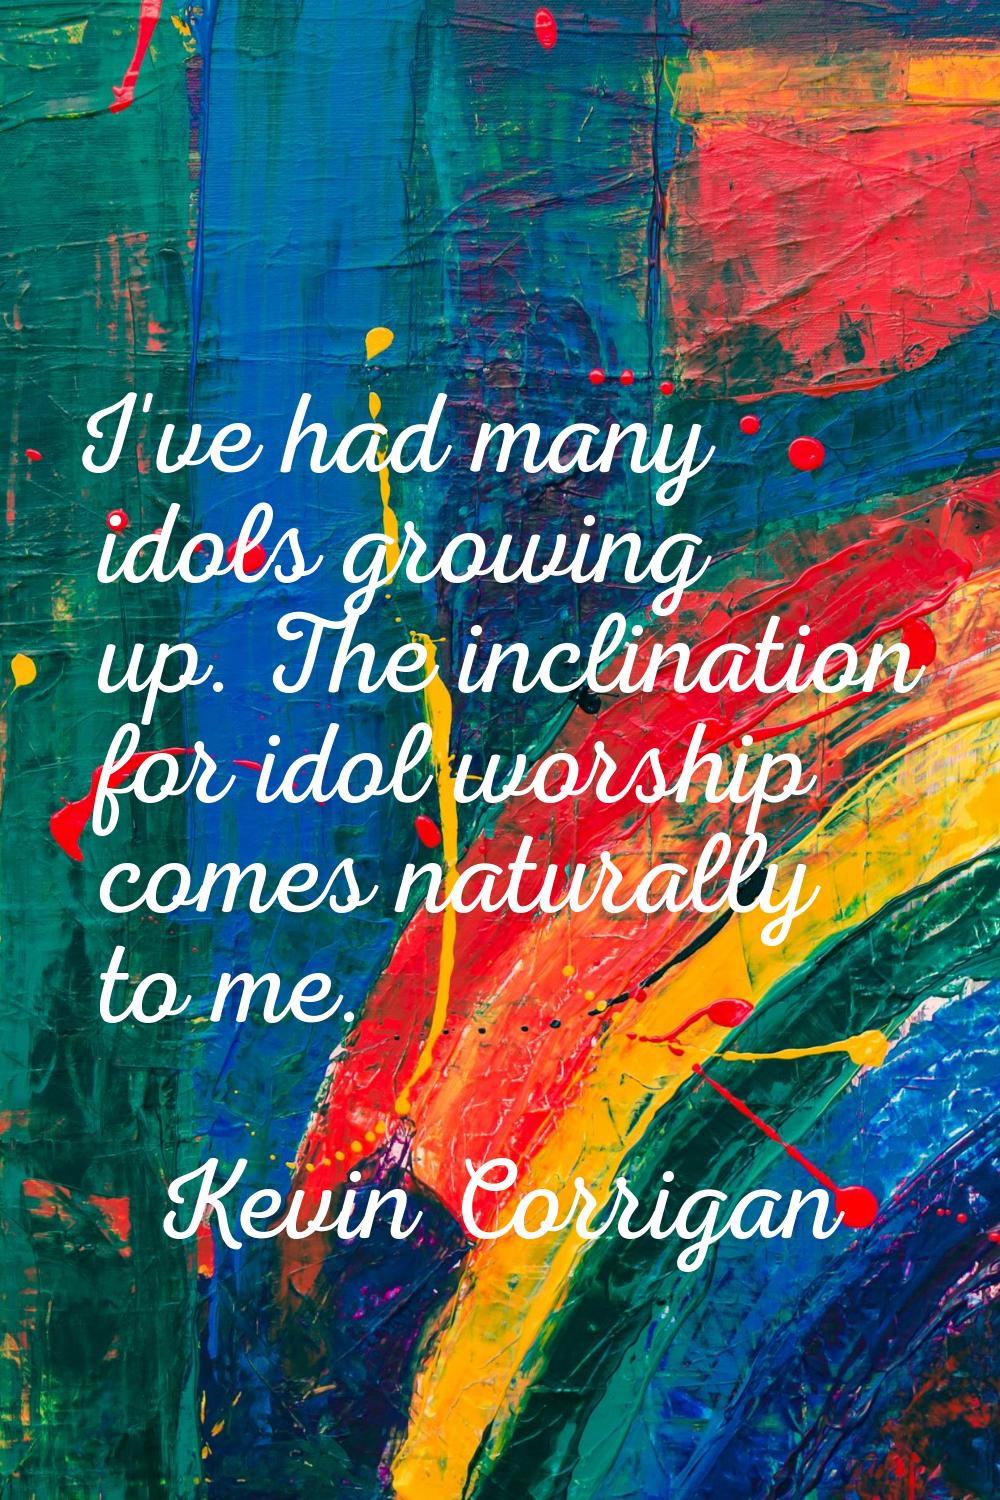 I've had many idols growing up. The inclination for idol worship comes naturally to me.